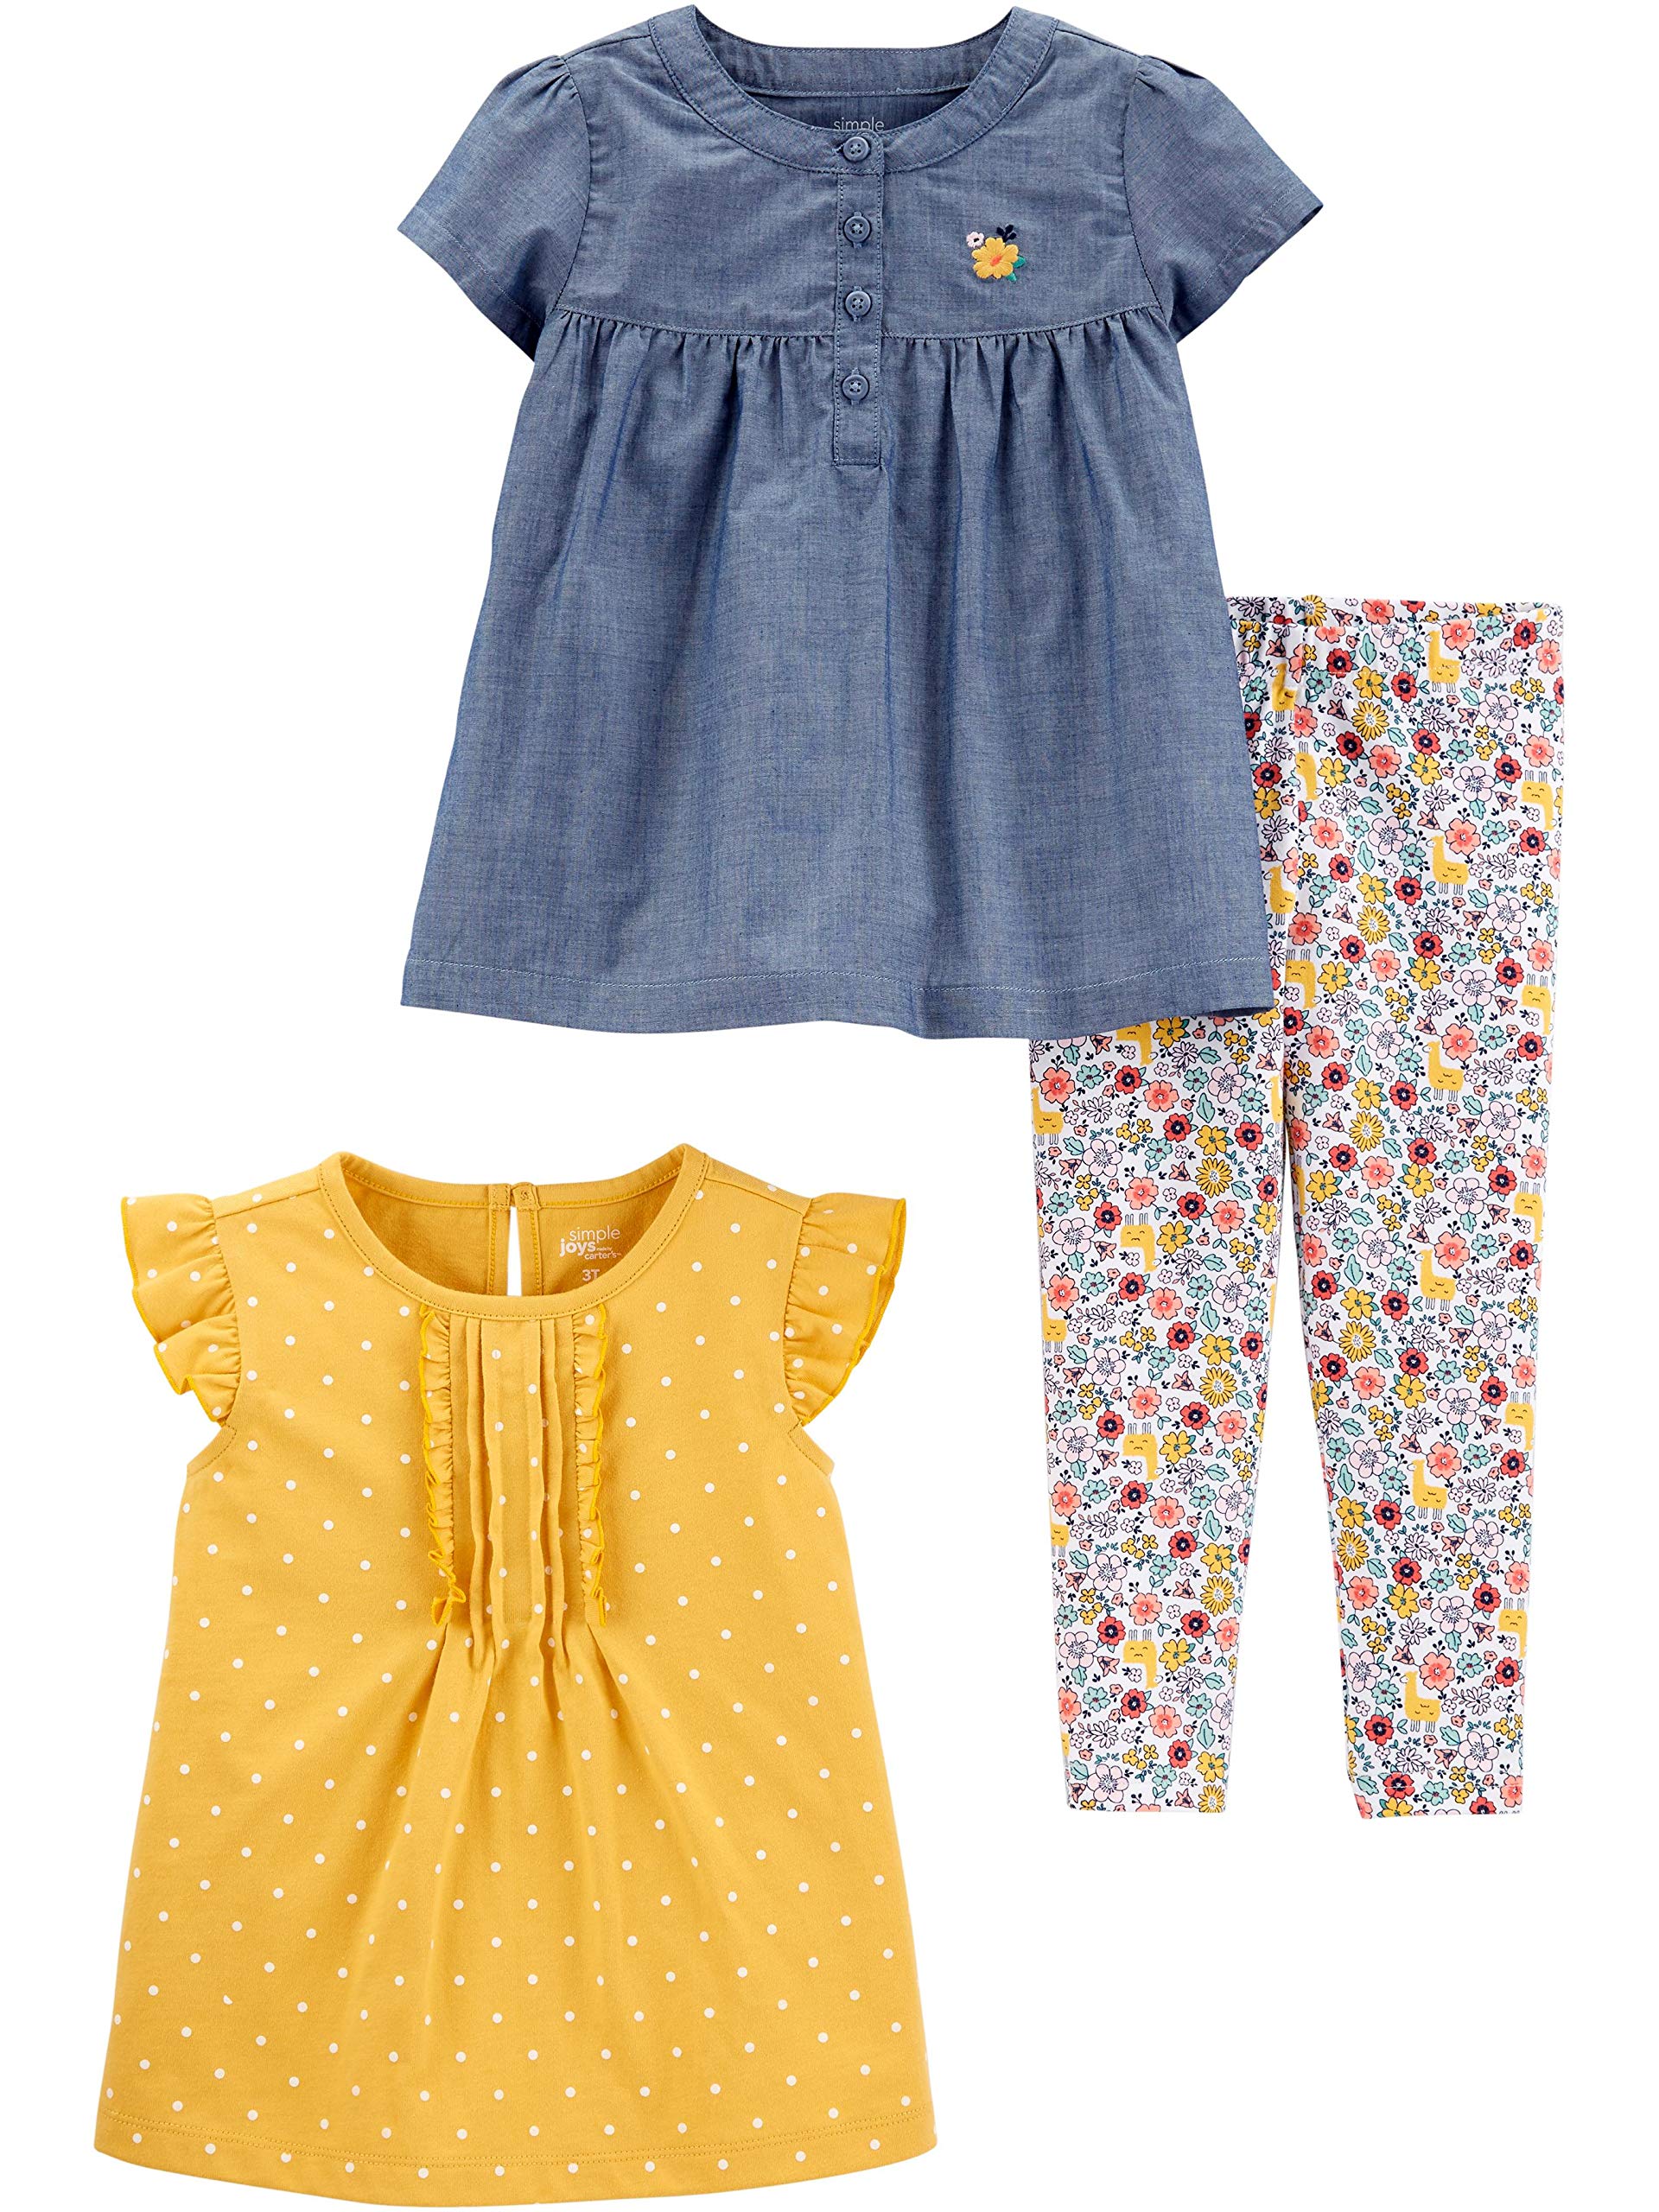 Simple Joys by Carter's Toddlers and Baby Girls' 3-Piece Playwear Set